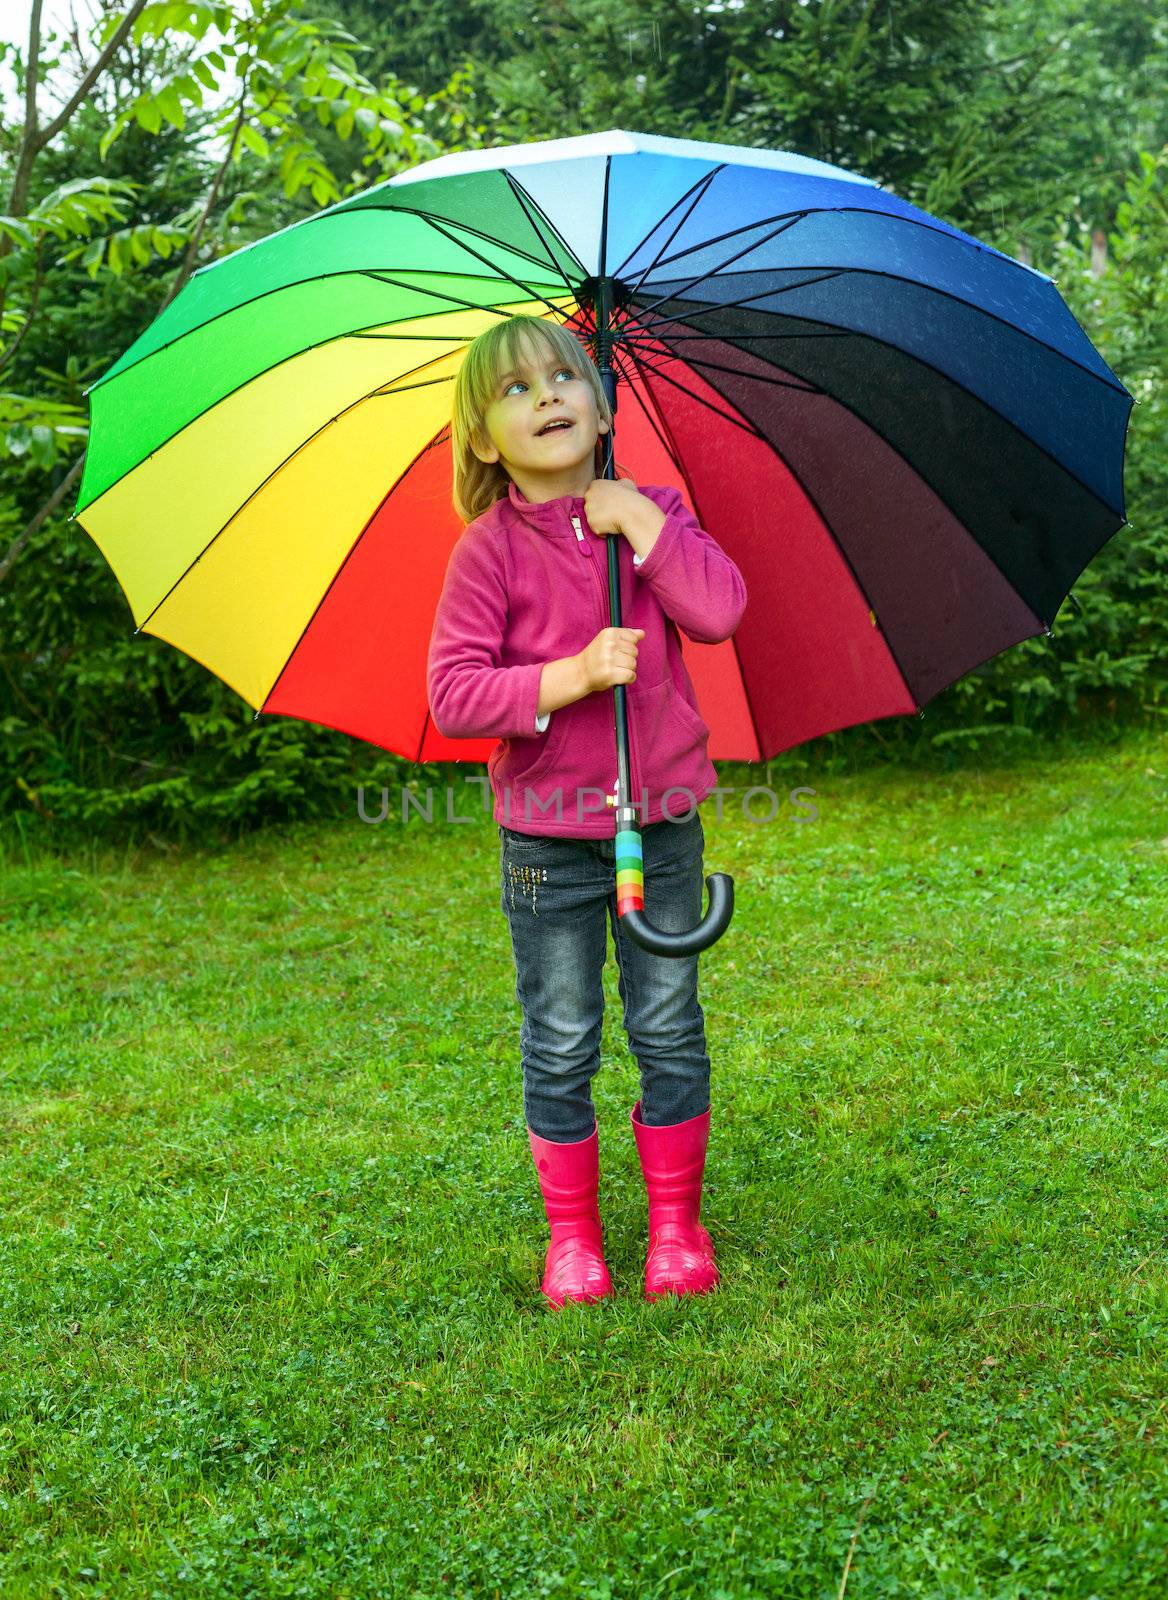 Child with umbrella outdoors by naumoid